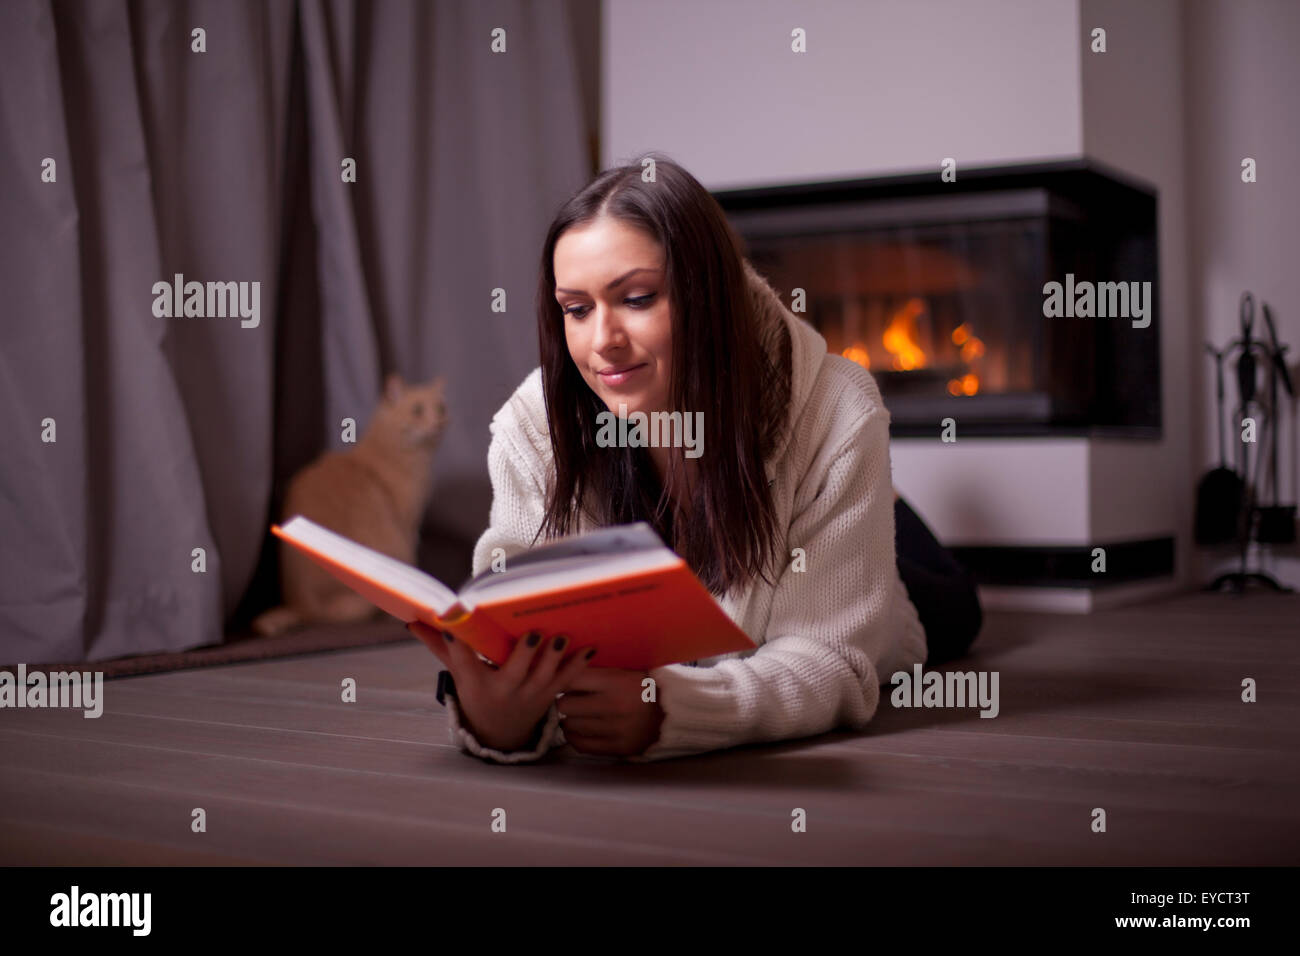 Beautiful woman lying on floor and reading book by fireplace and cat behind Stock Photo